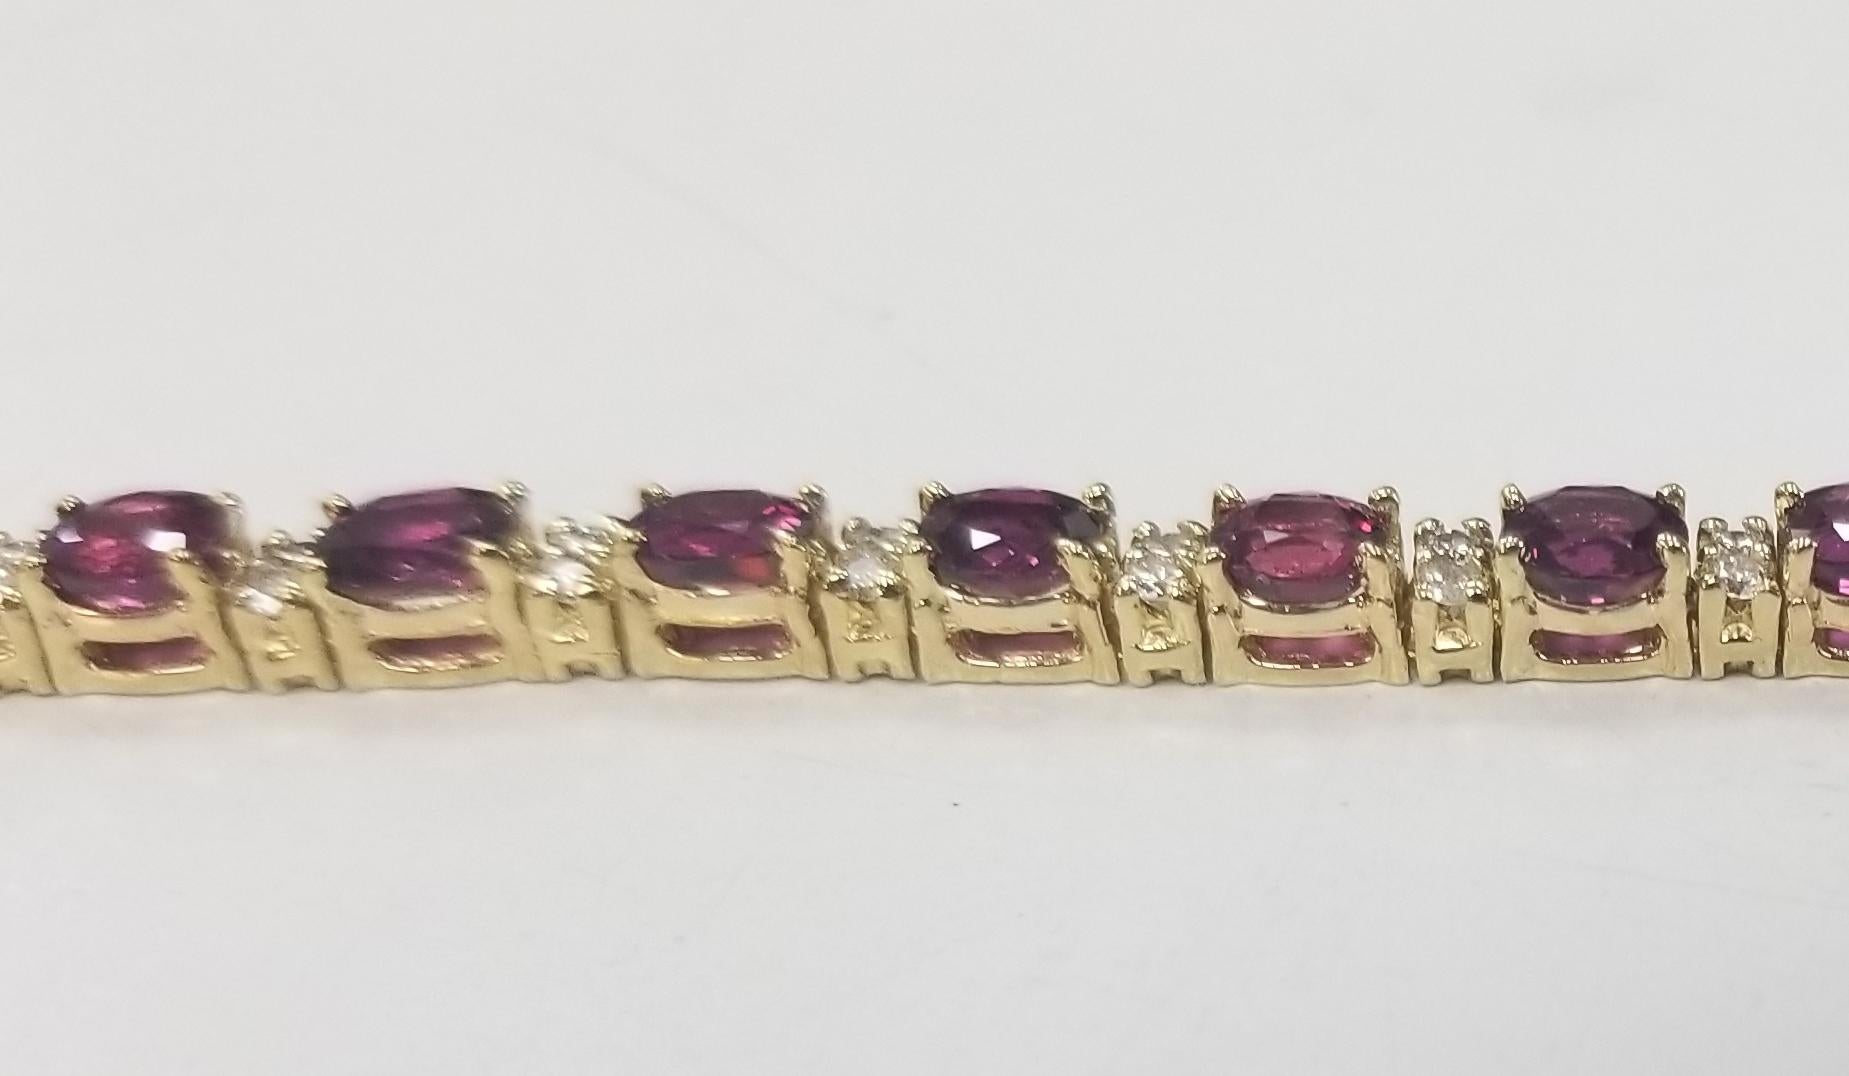 14k yellow gold oval ruby and diamond bracelet, containing 25 oval rubies of gem quality weighing 10.78cts. and 50 round full cut diamonds; color 